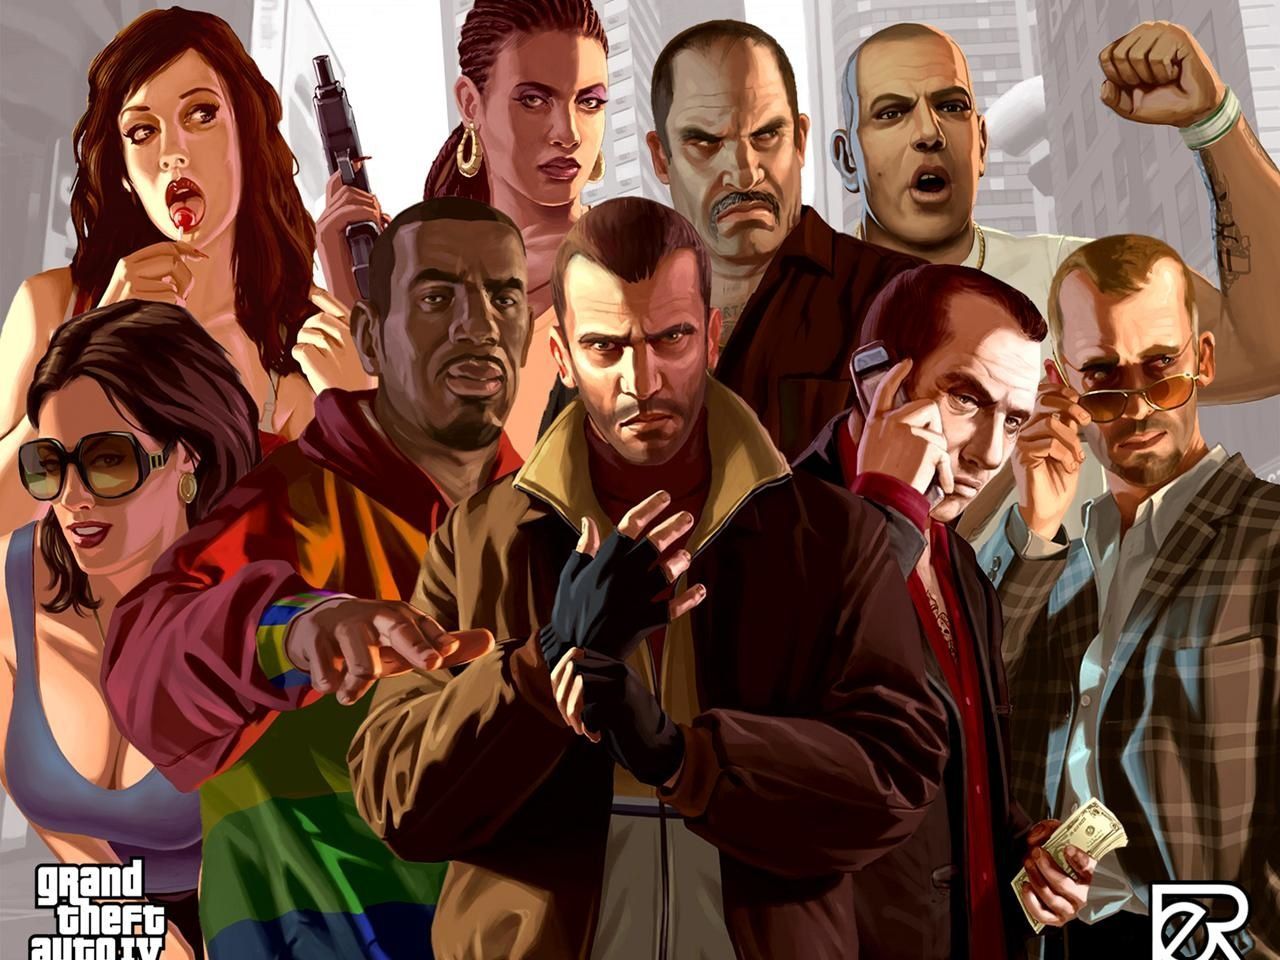 Grand Theft Auto Characters Wallpaper Free Grand Theft Auto